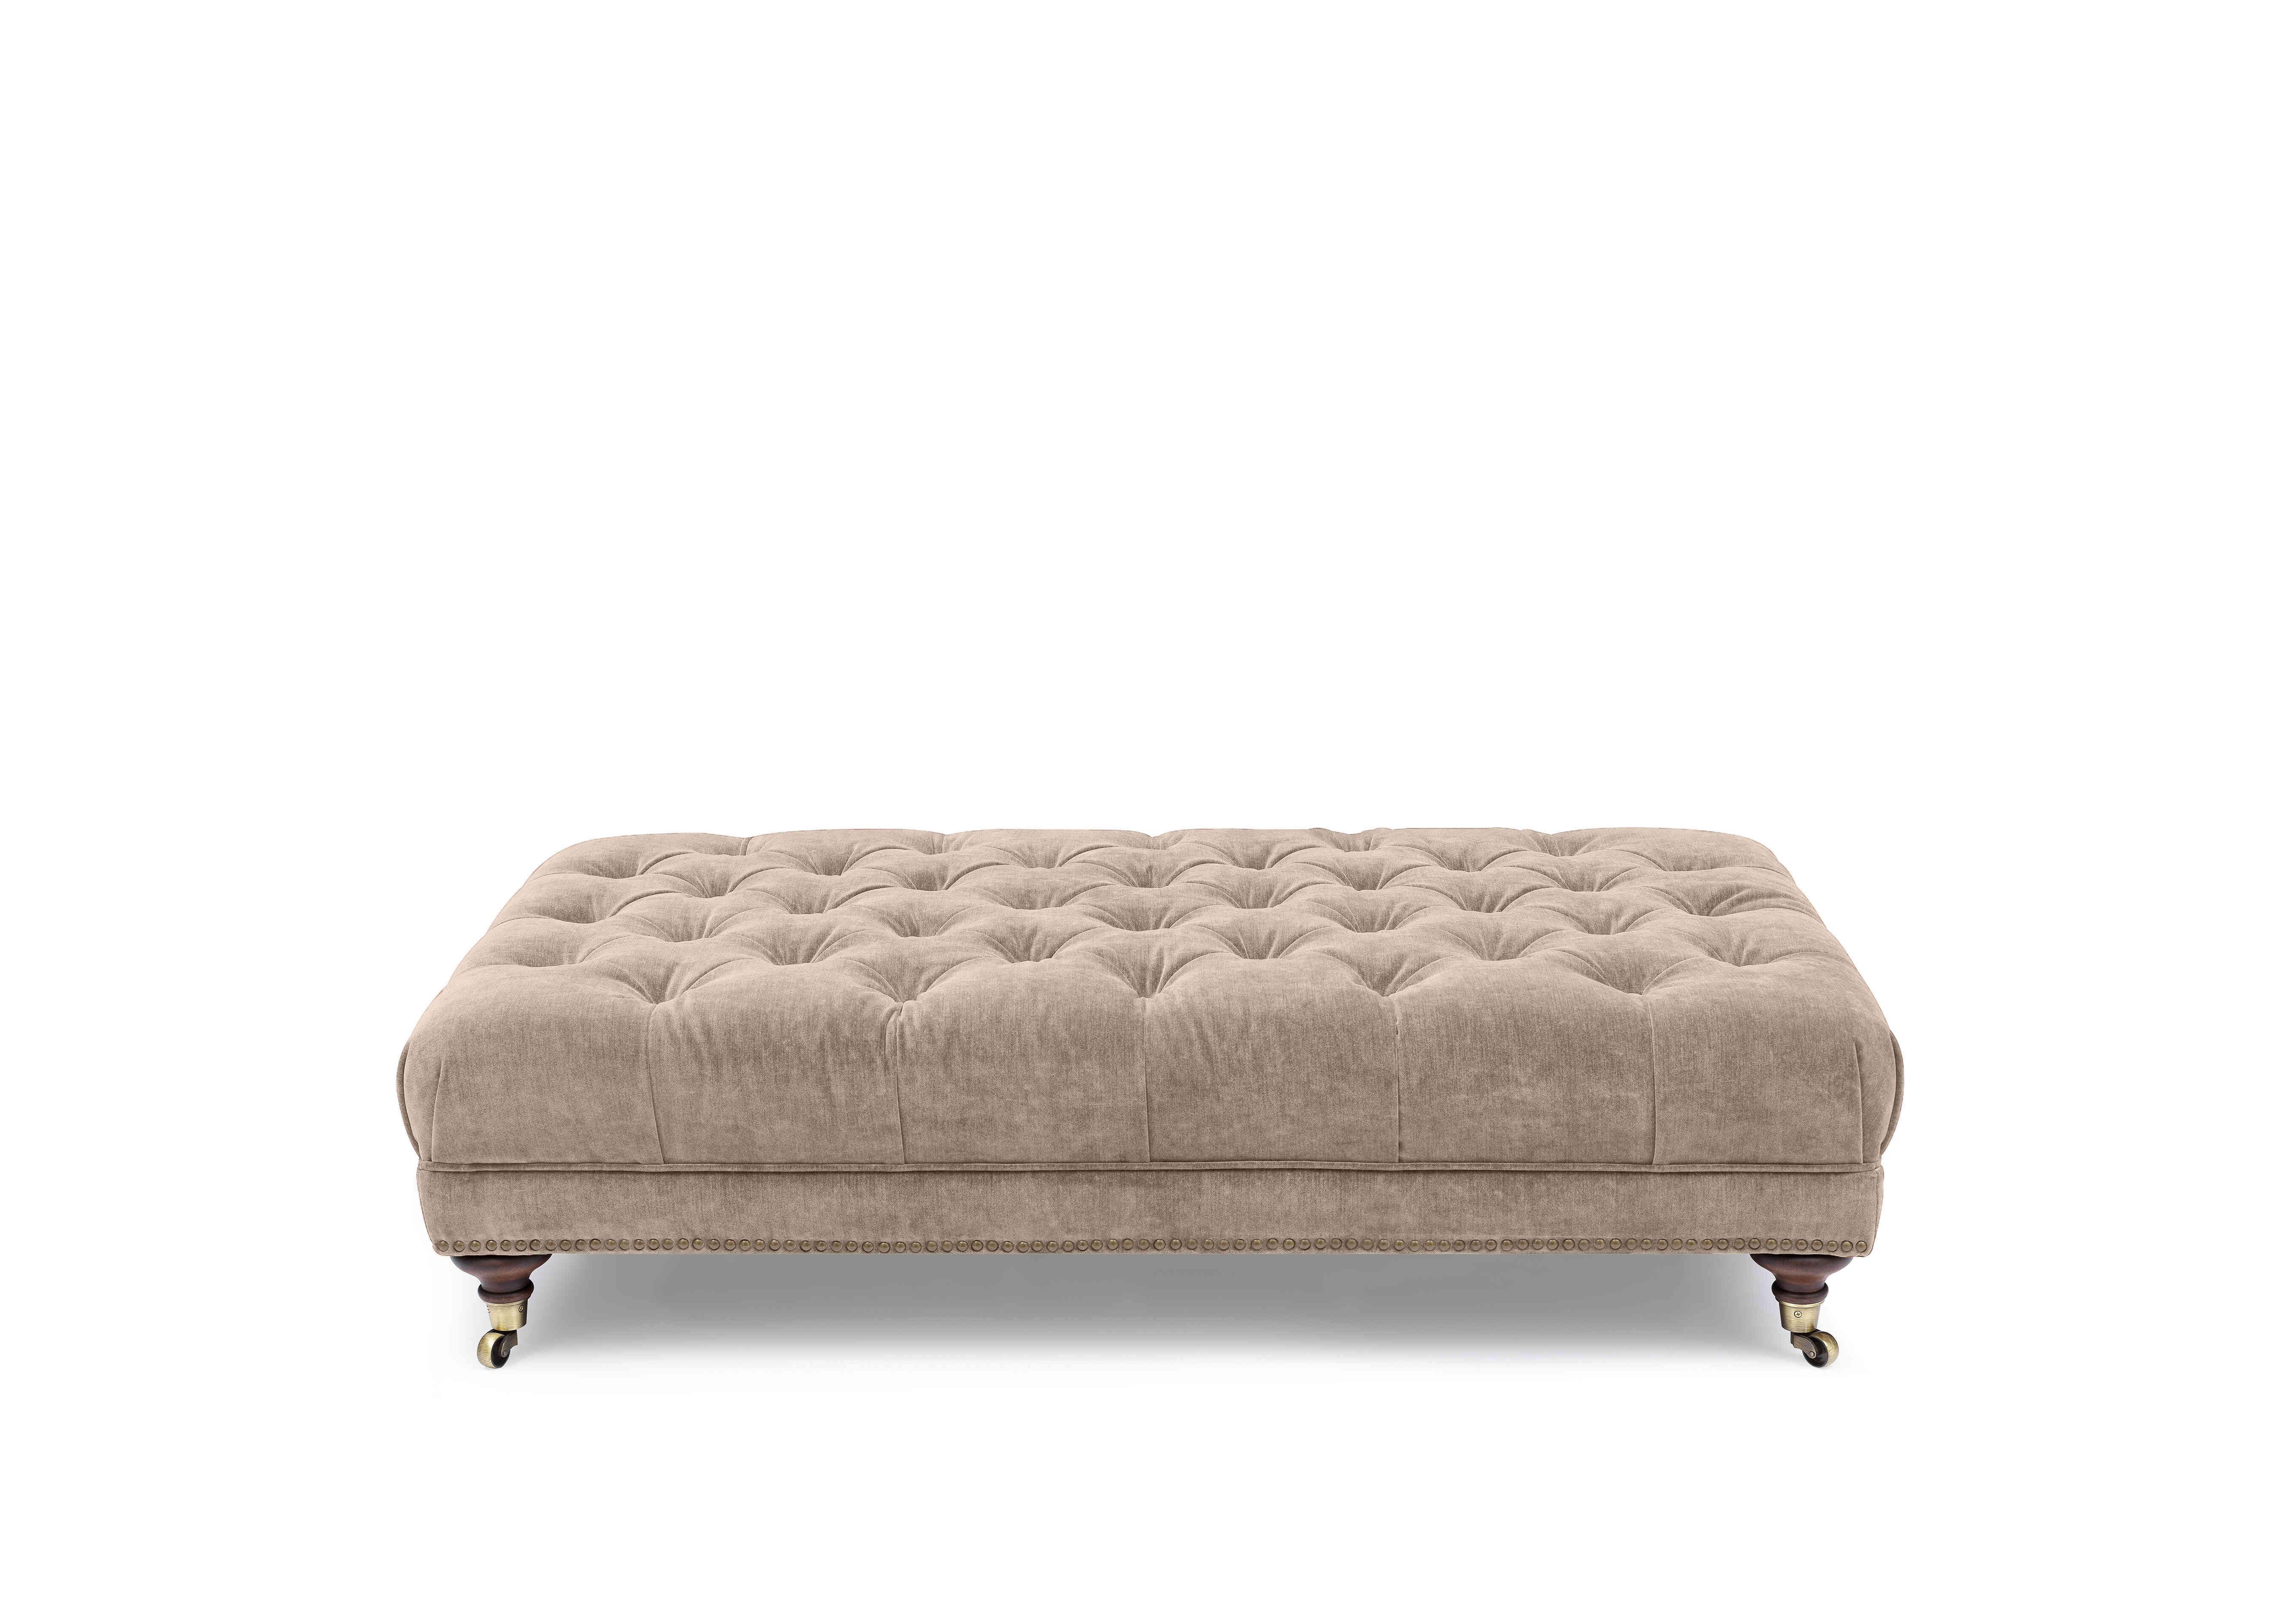 Wallace Fabric Rectangular Footstool with Castors in X3y1-W022 Barley on Furniture Village